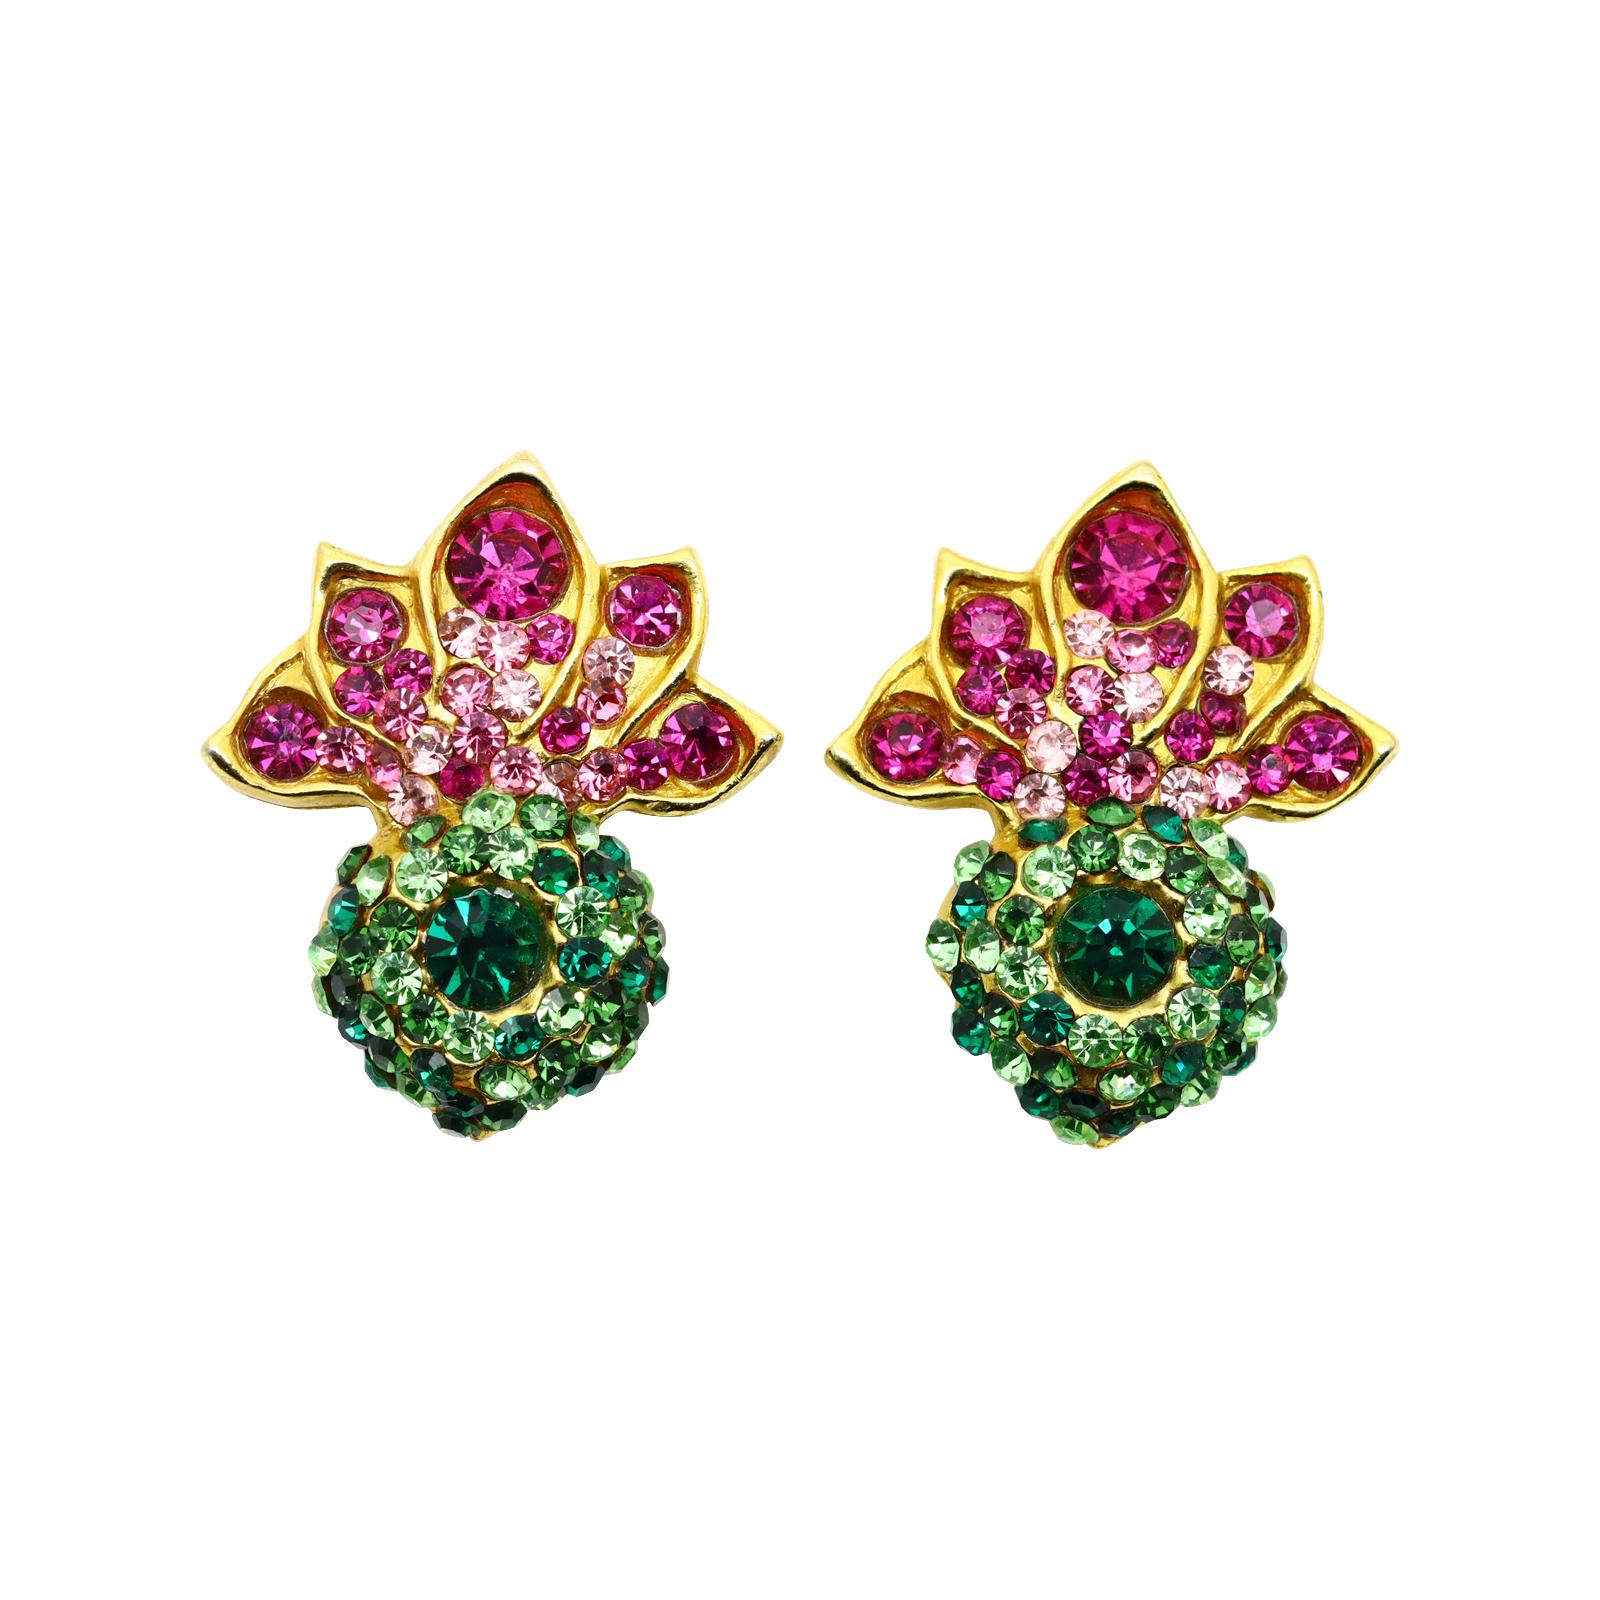 Artist Vintage Lorenz Baumer Gold Tone with Pink and Green Crystal Earrings Circa 1980s